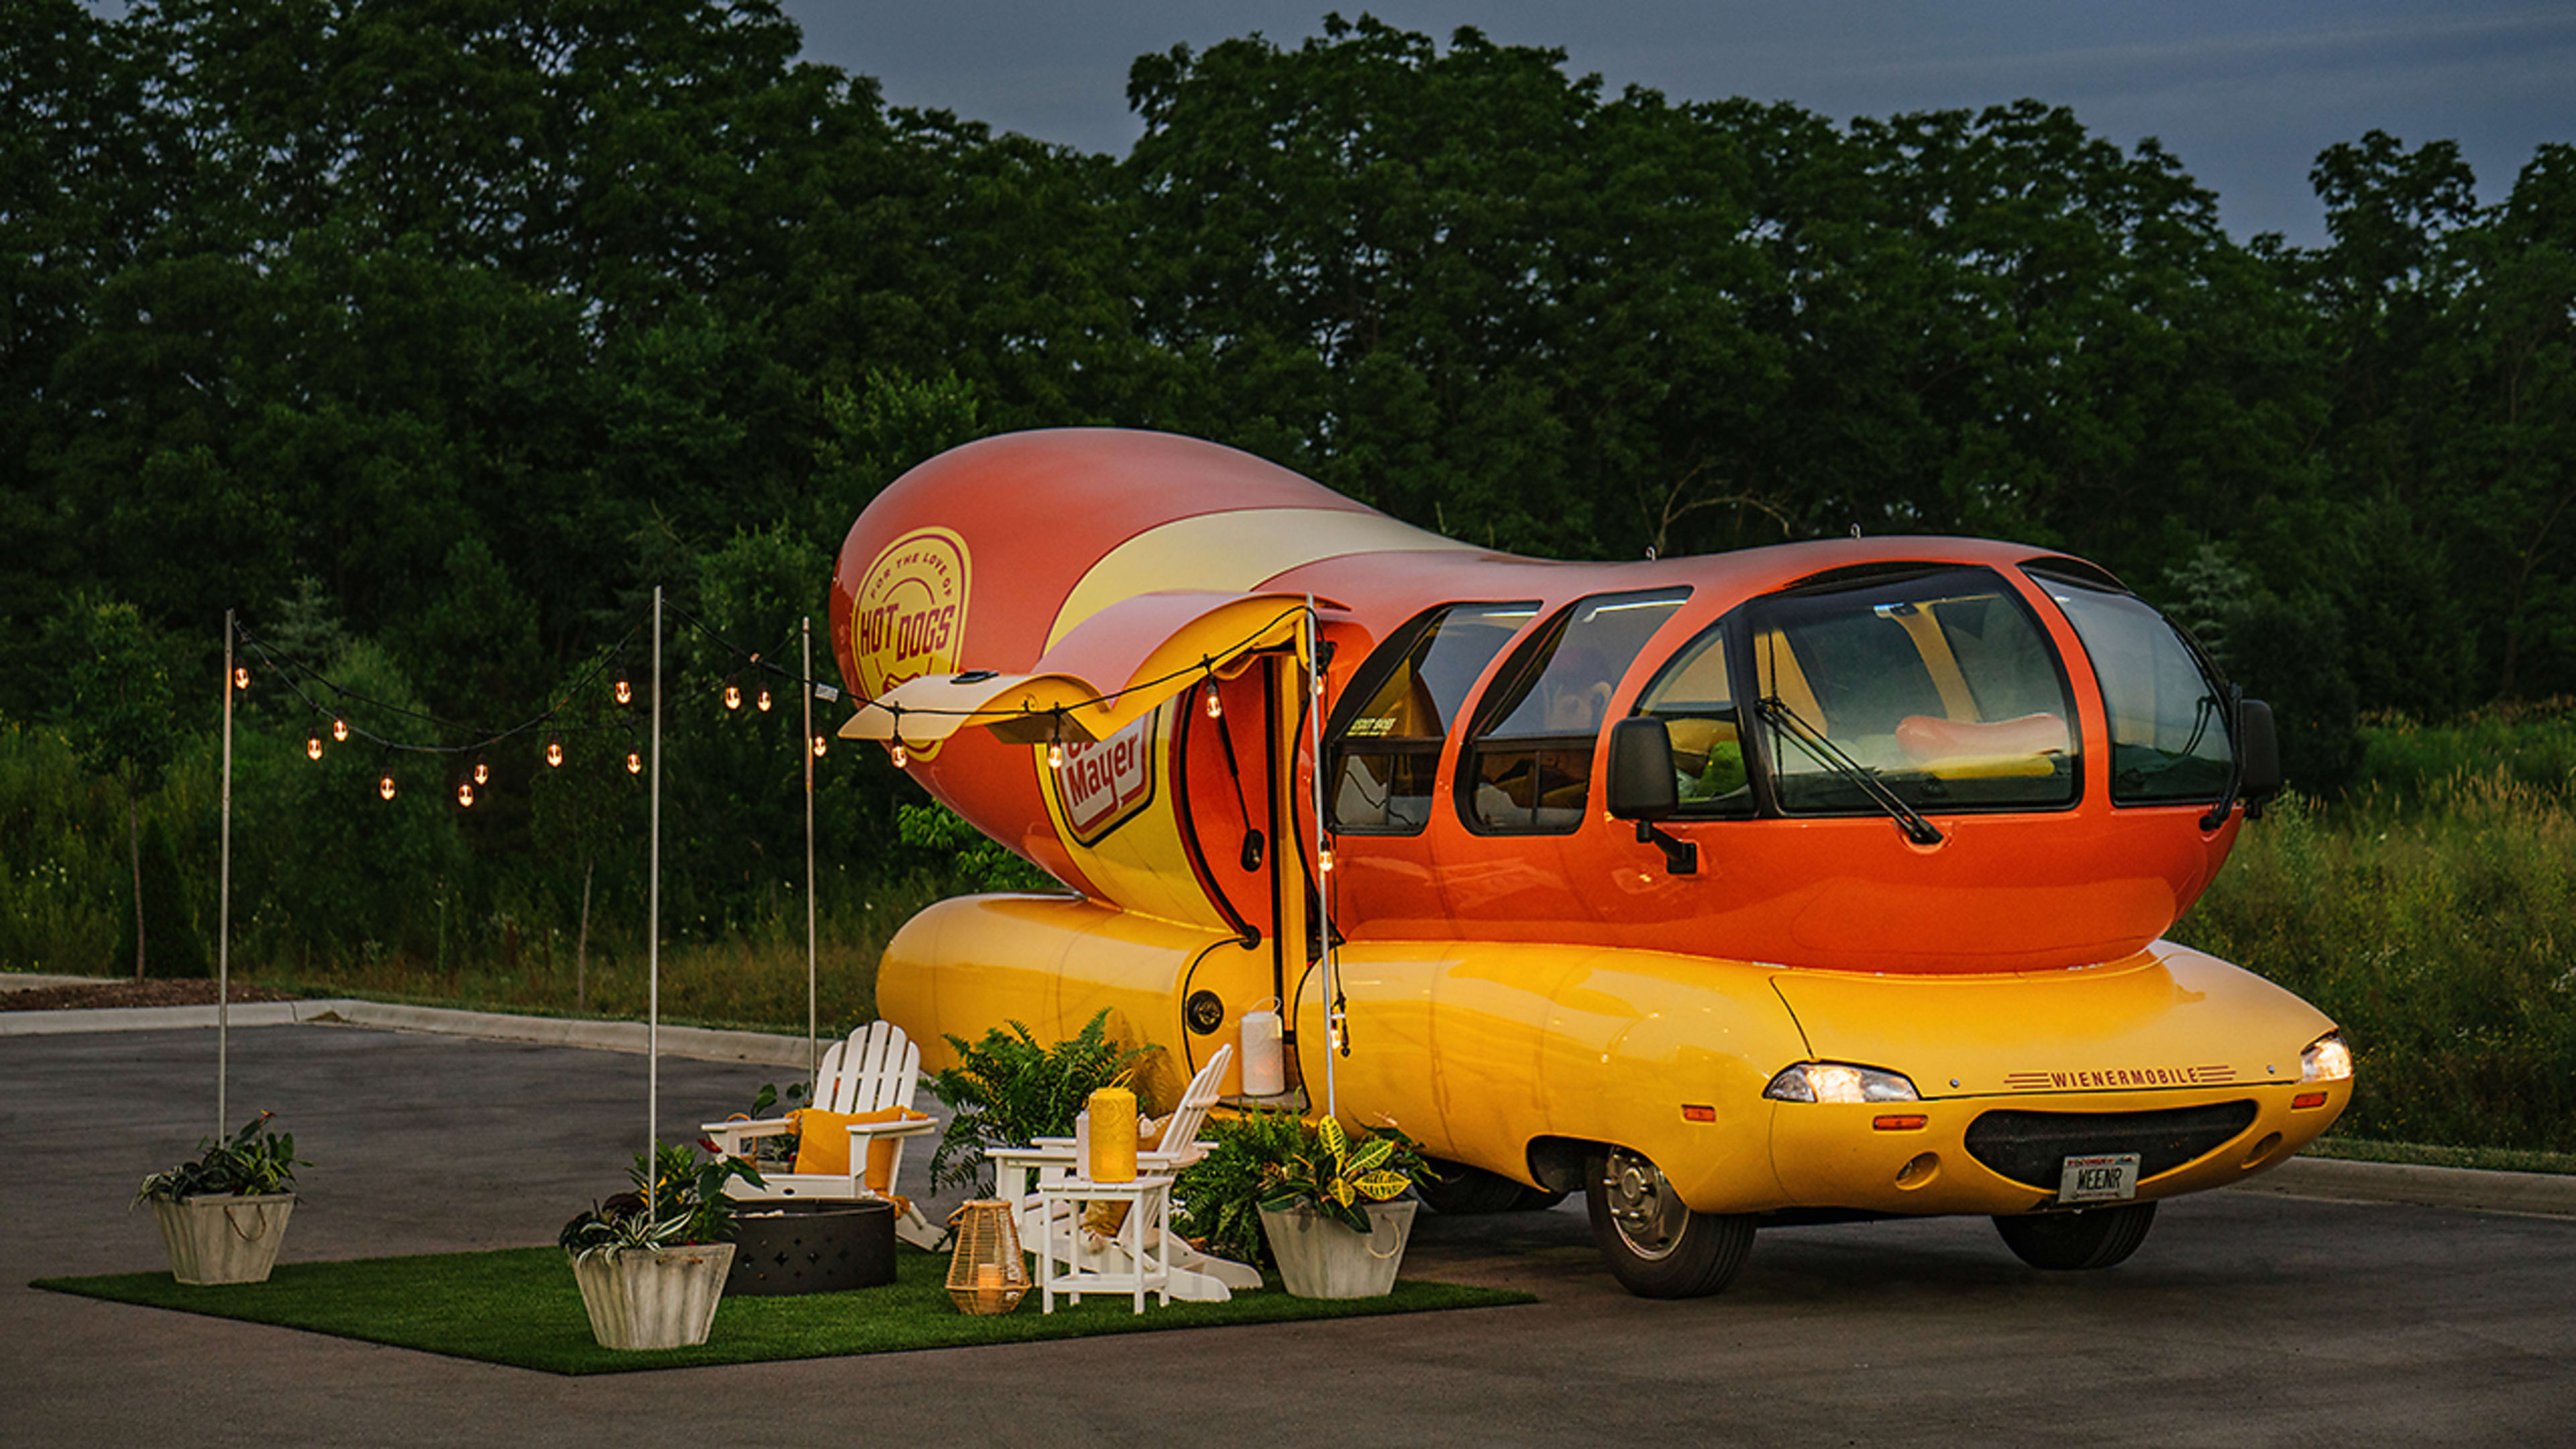 Hot dog! You can rent the Oscar Mayer Wienermobile on Airbnb